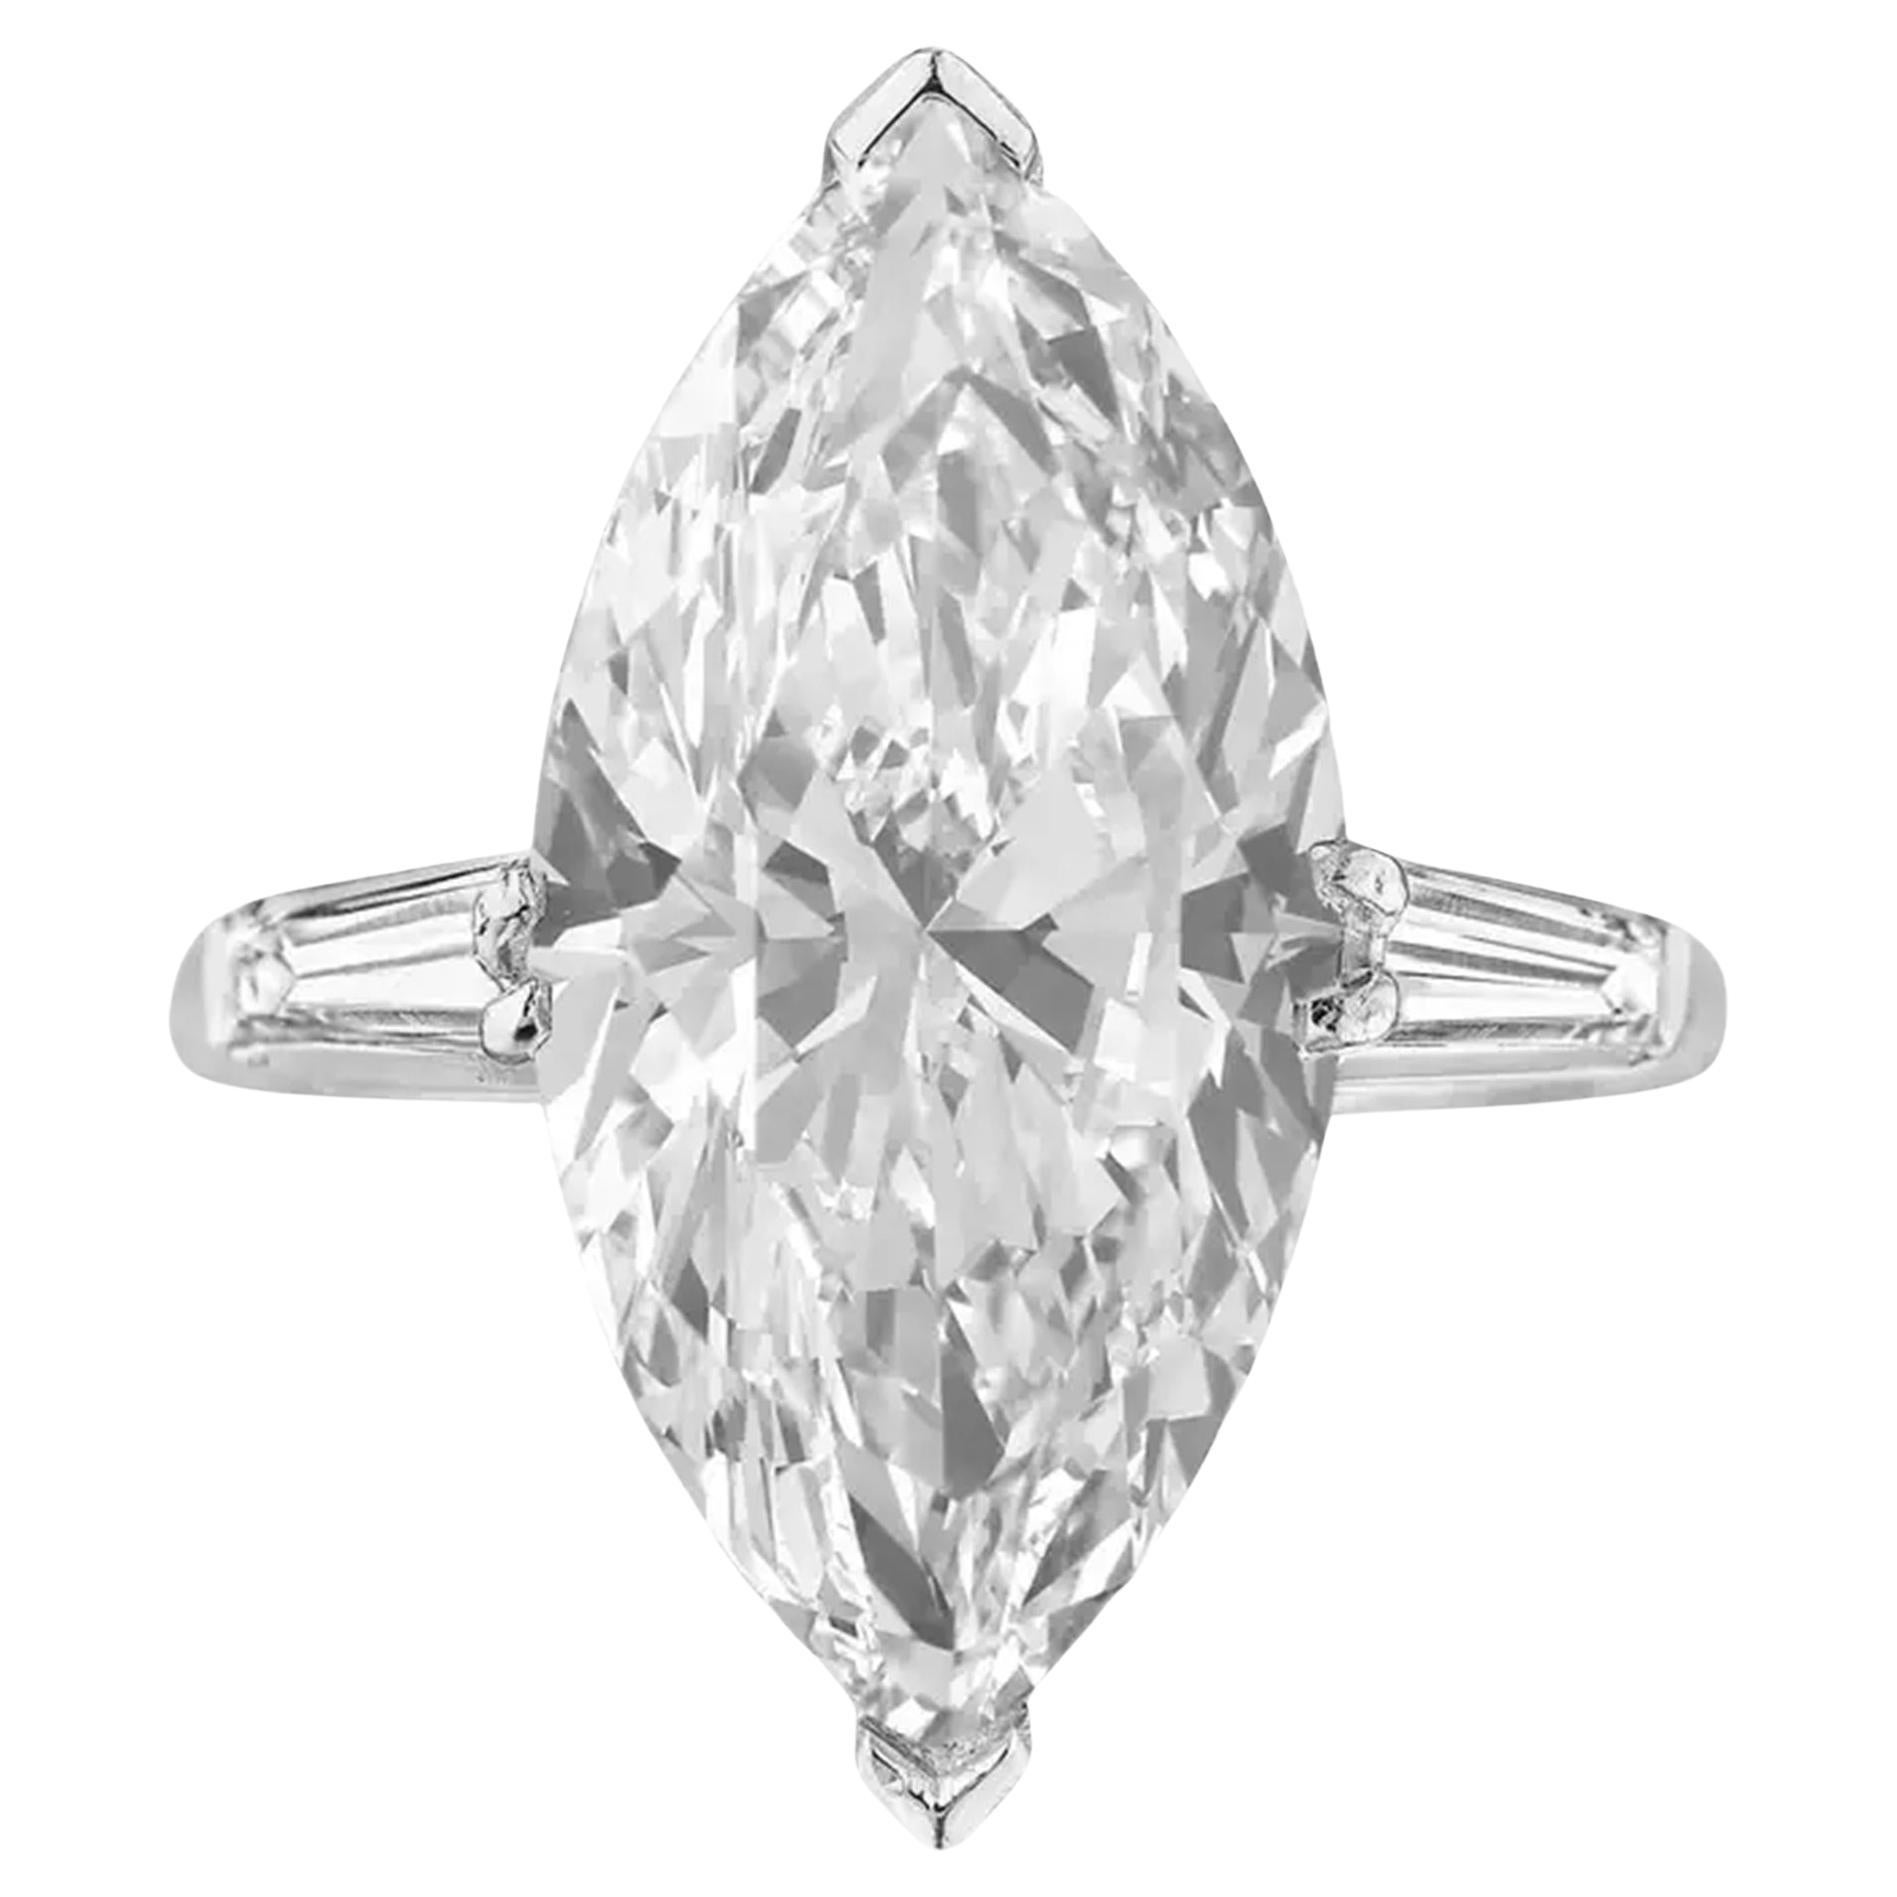 Exceptional GIA Certified 6.06 Carat Marquise Diamond Ring  For Sale